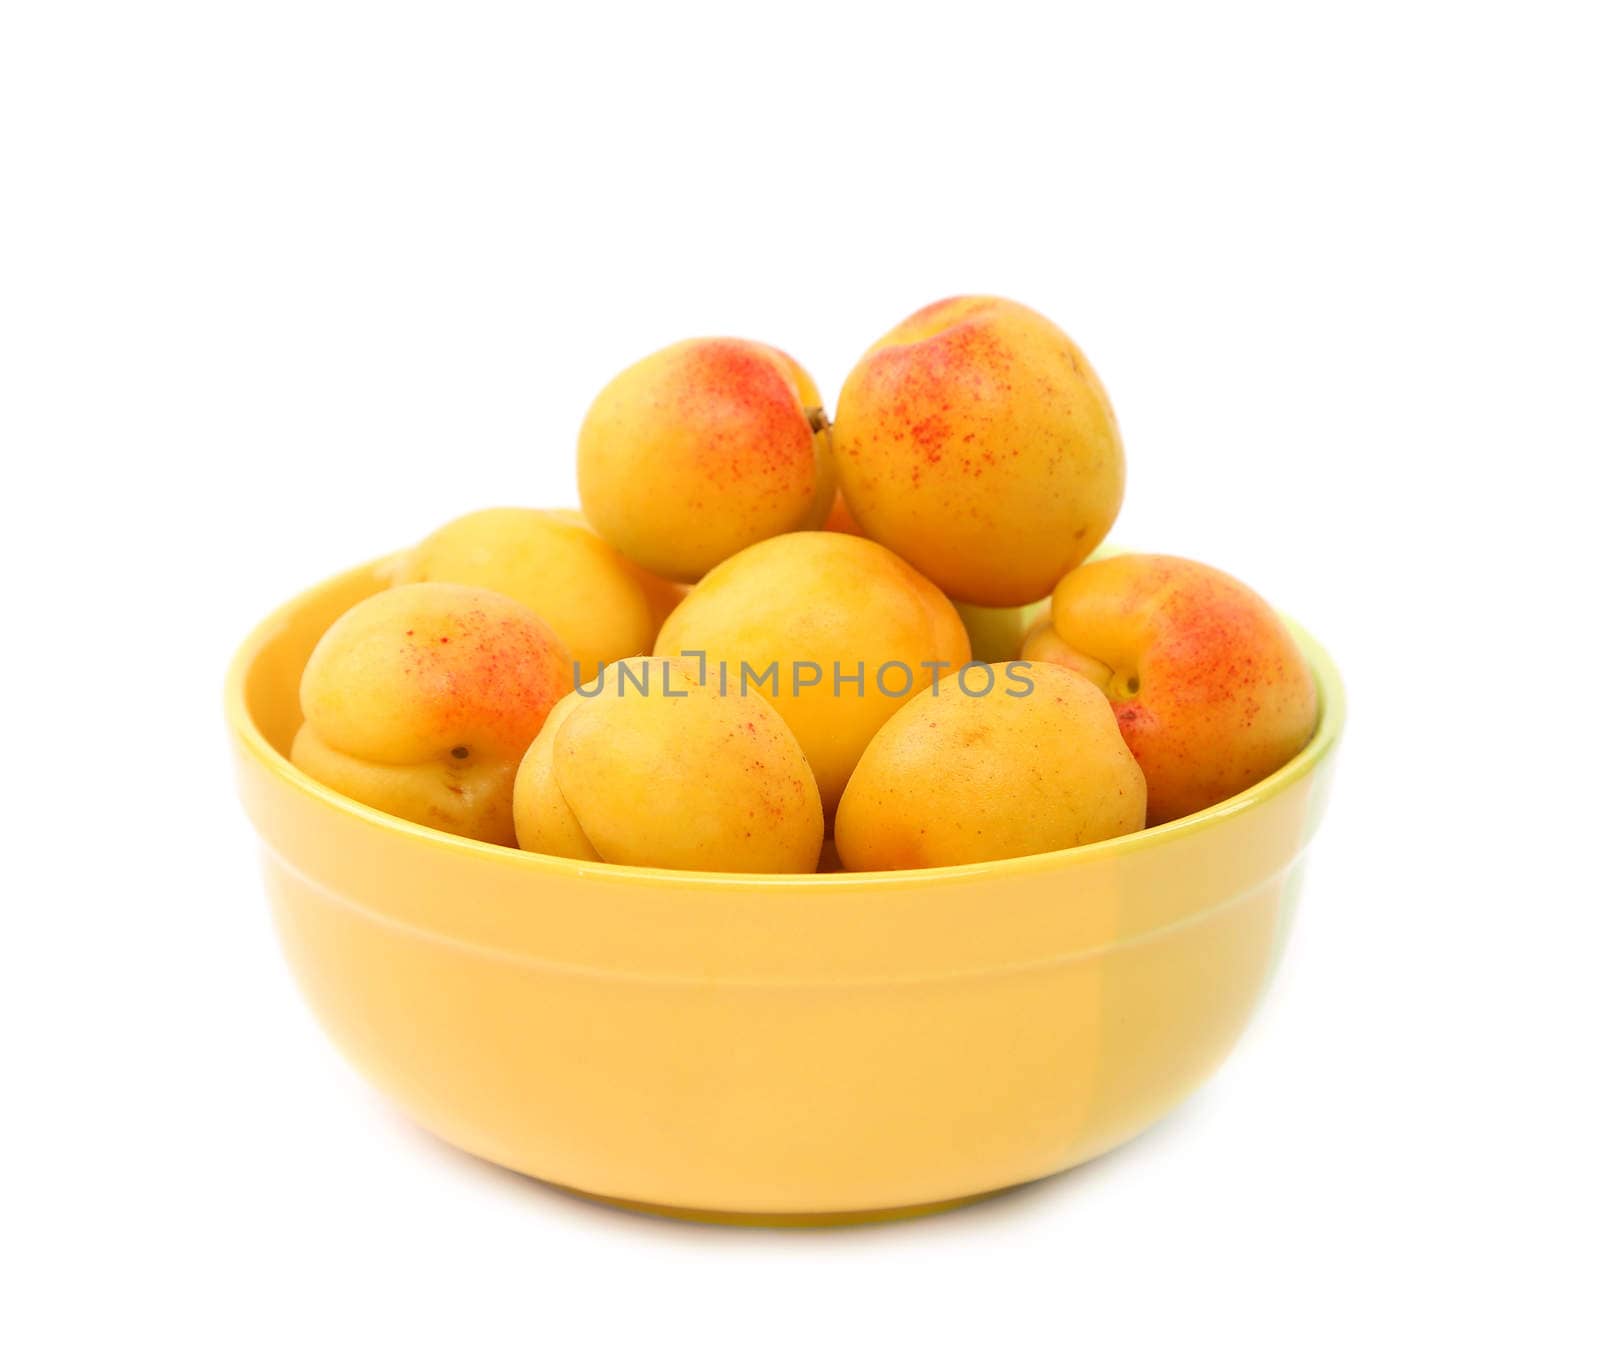 A fresh apricots in the bowl by indigolotos